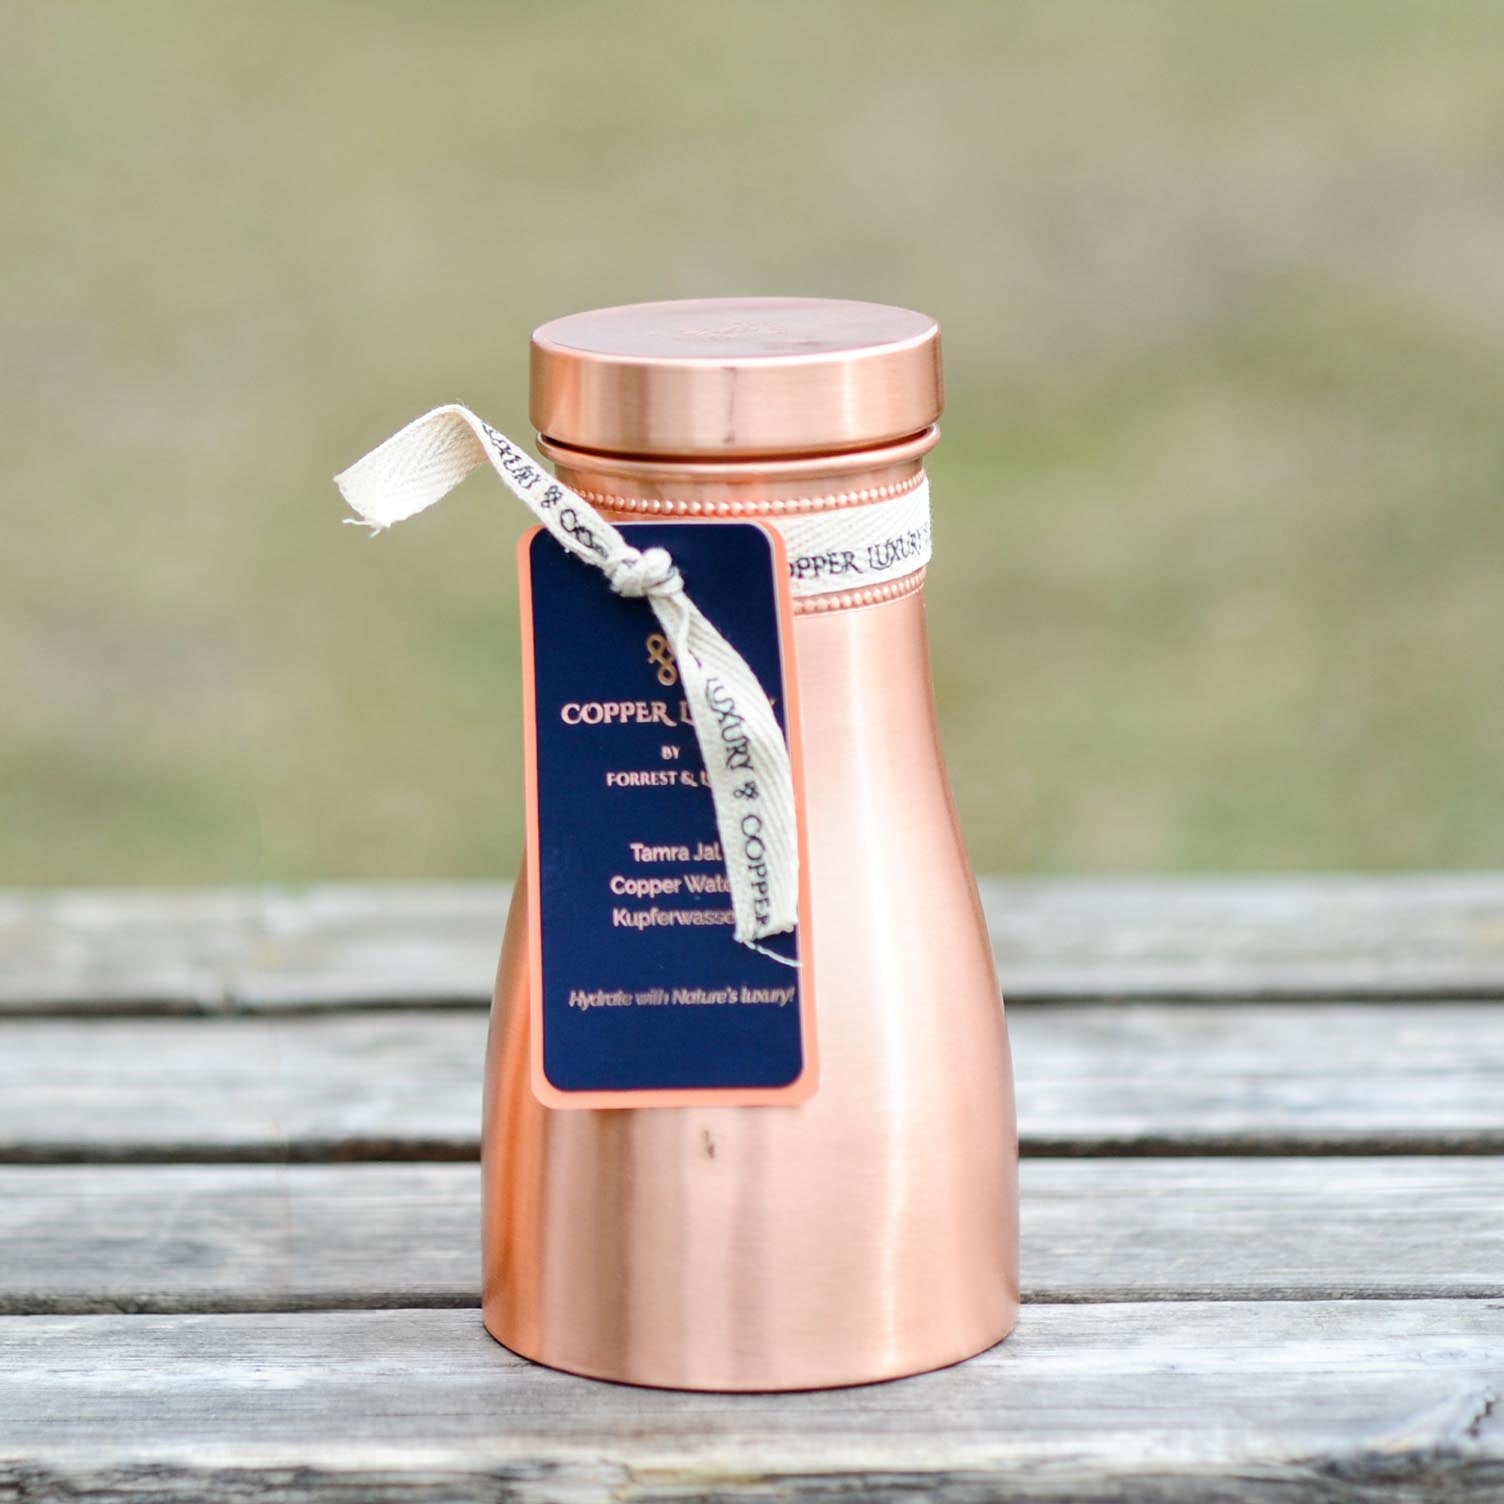 Luxury Pitcher made of 99.7% pure copper